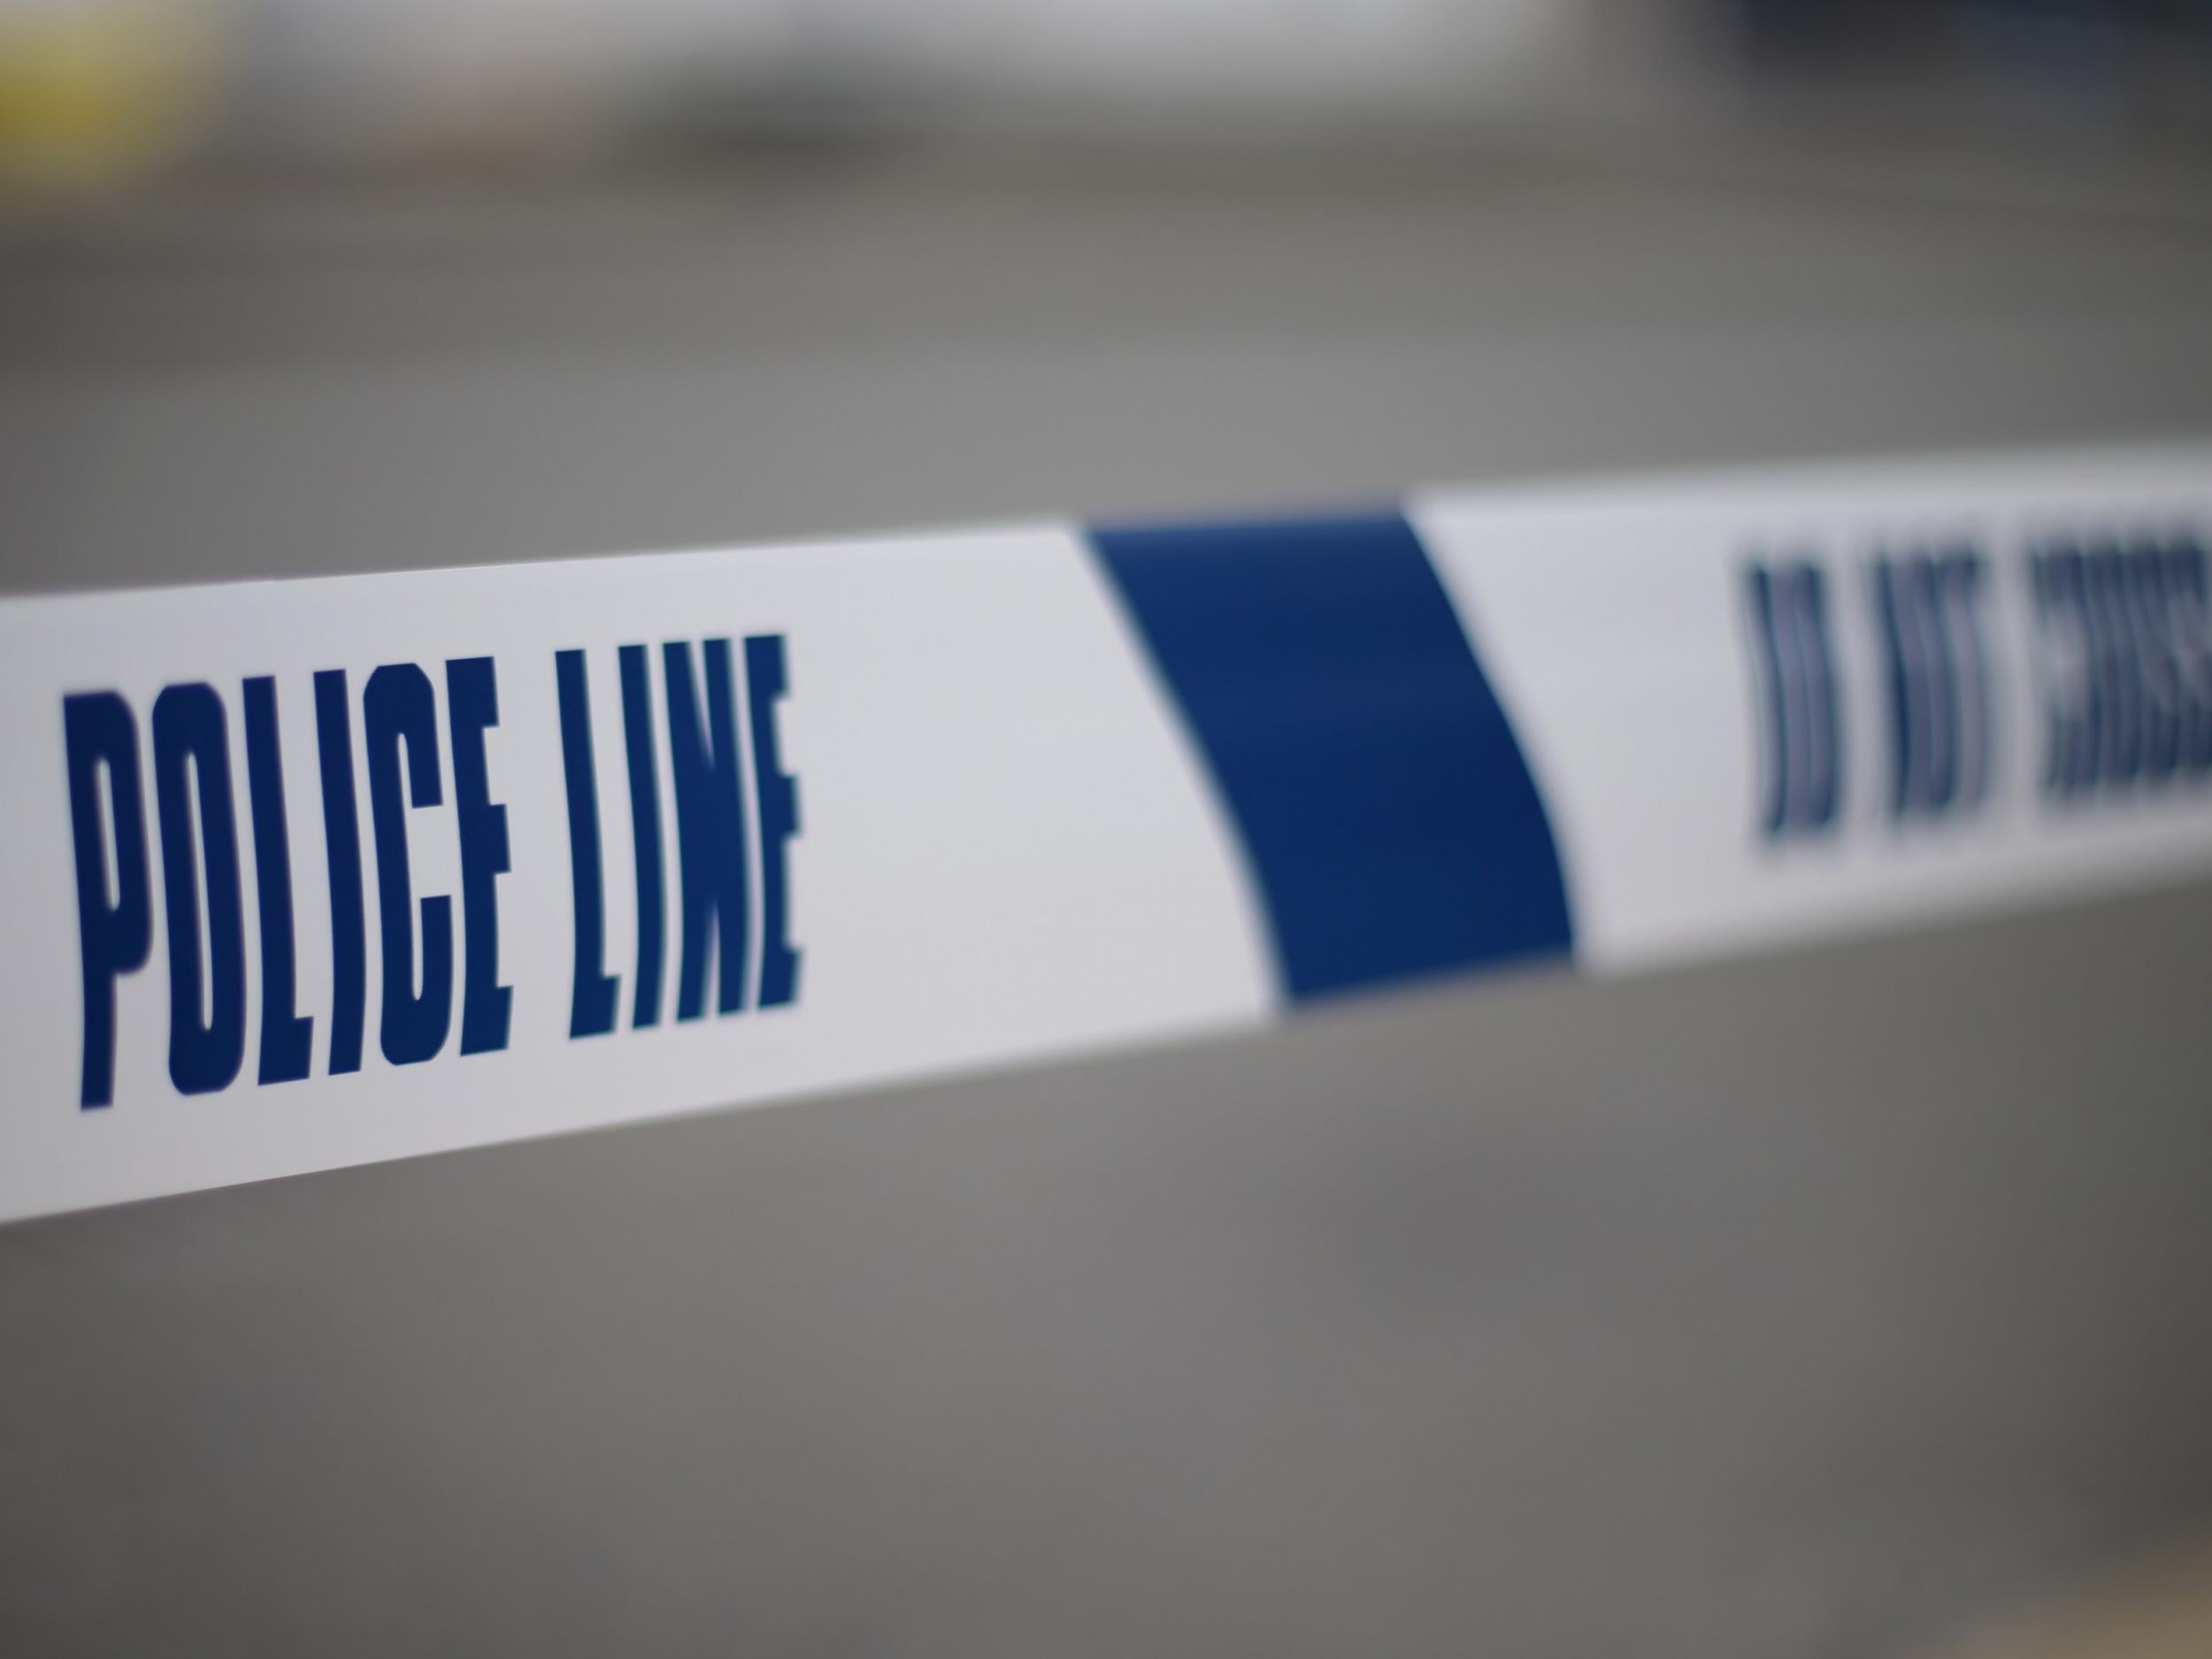 Stabbing purportedly happened after a fight in a supermarket car park